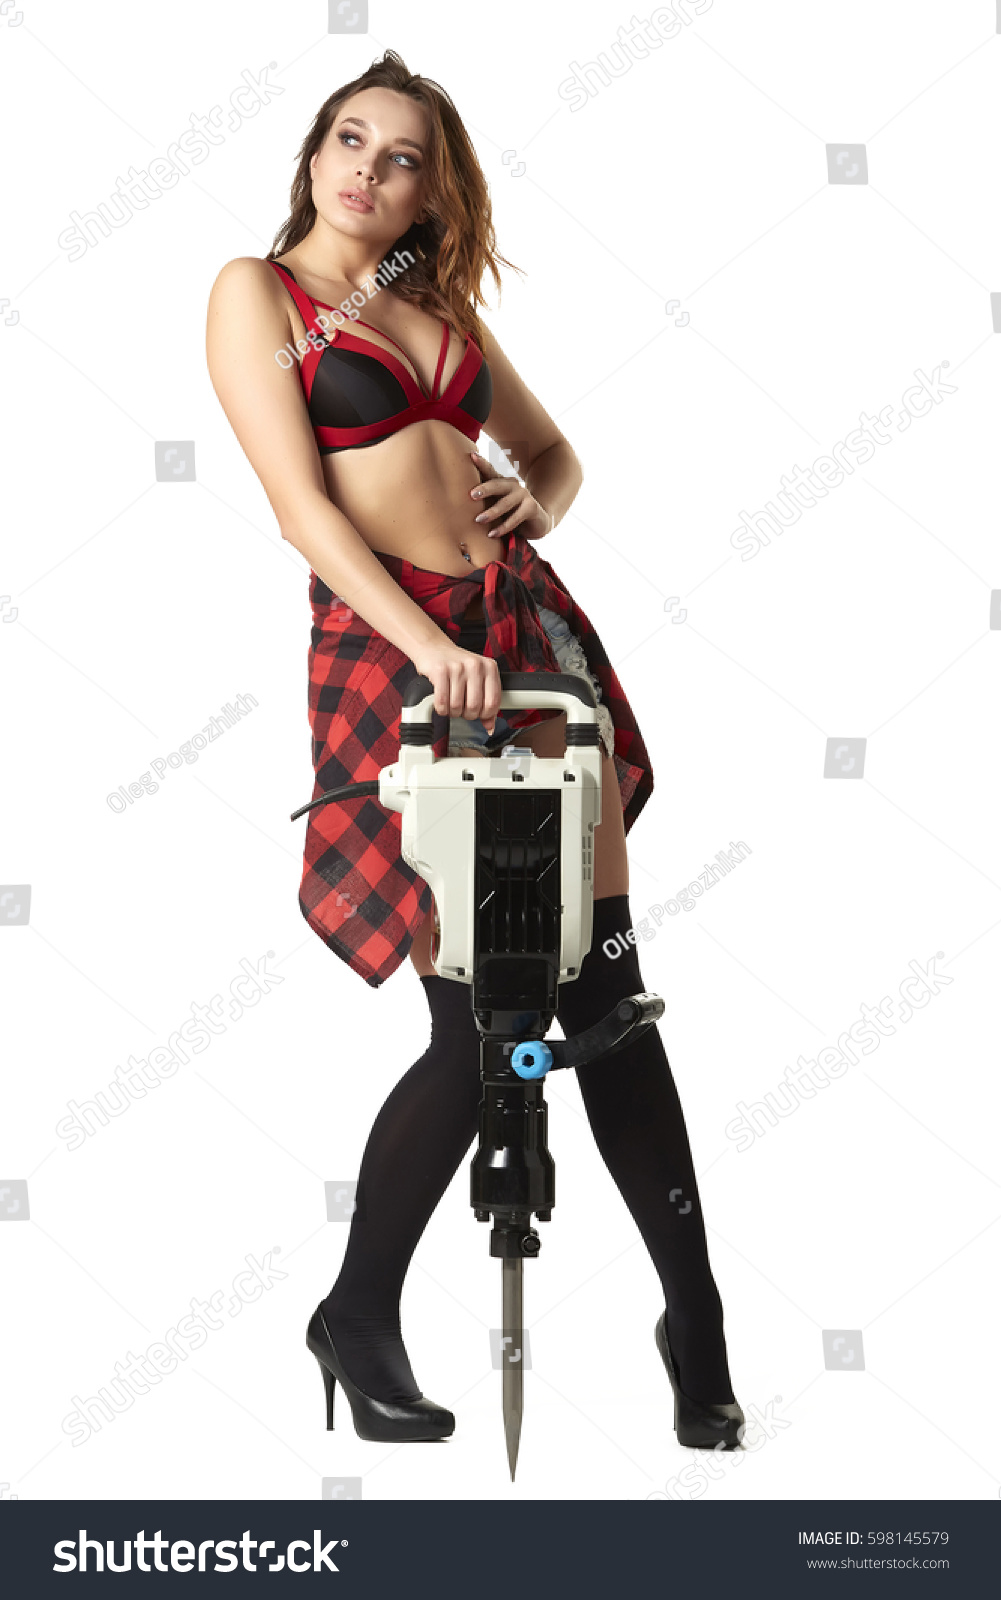 Sexy Girl Frank Clothes Construction Tool Foto Stok 598145579 Shutterstock